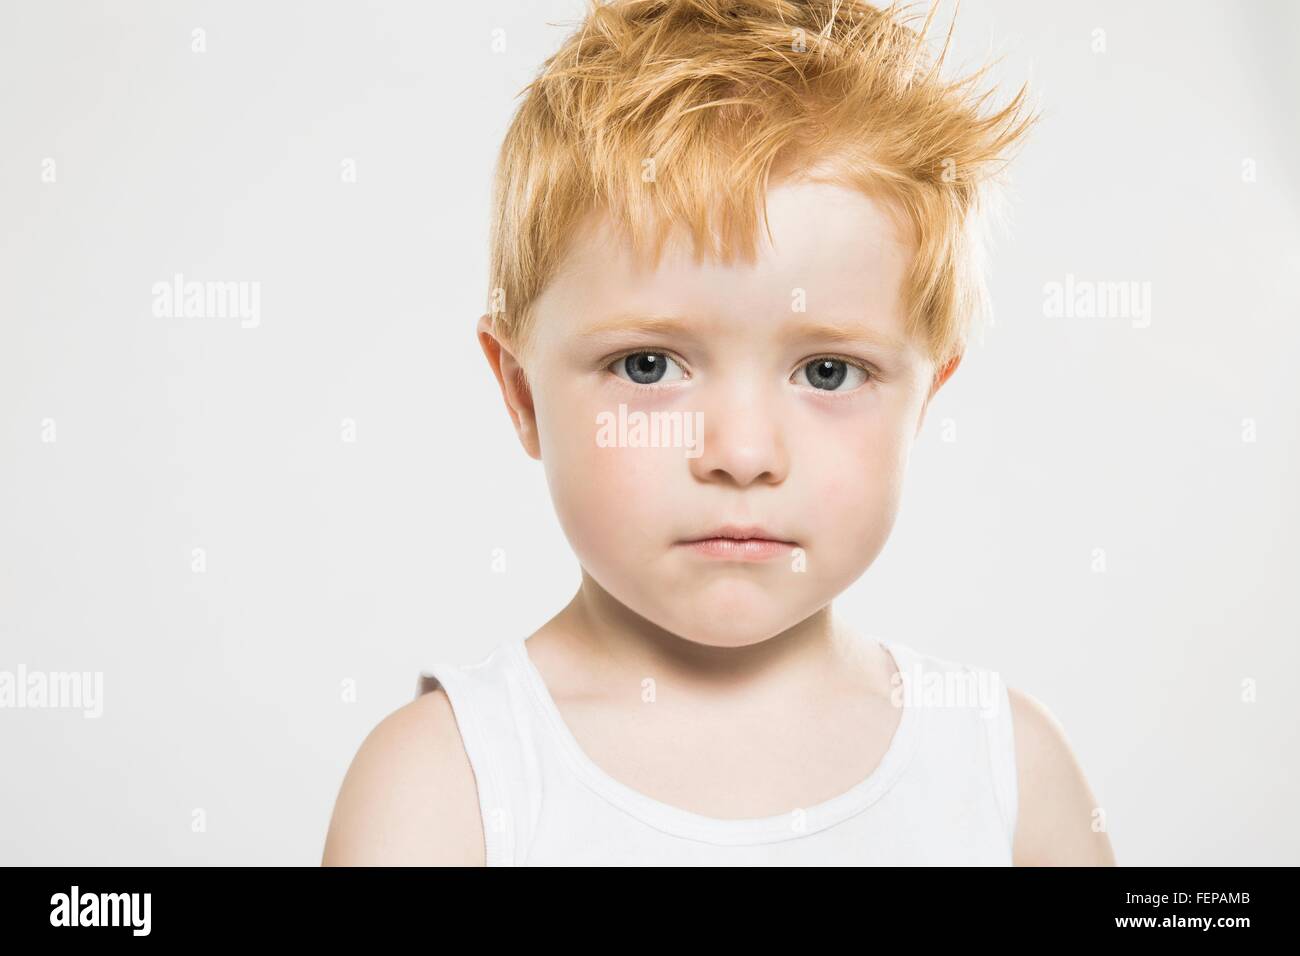 Studio portrait of confident staring boy with ginger hair Stock Photo